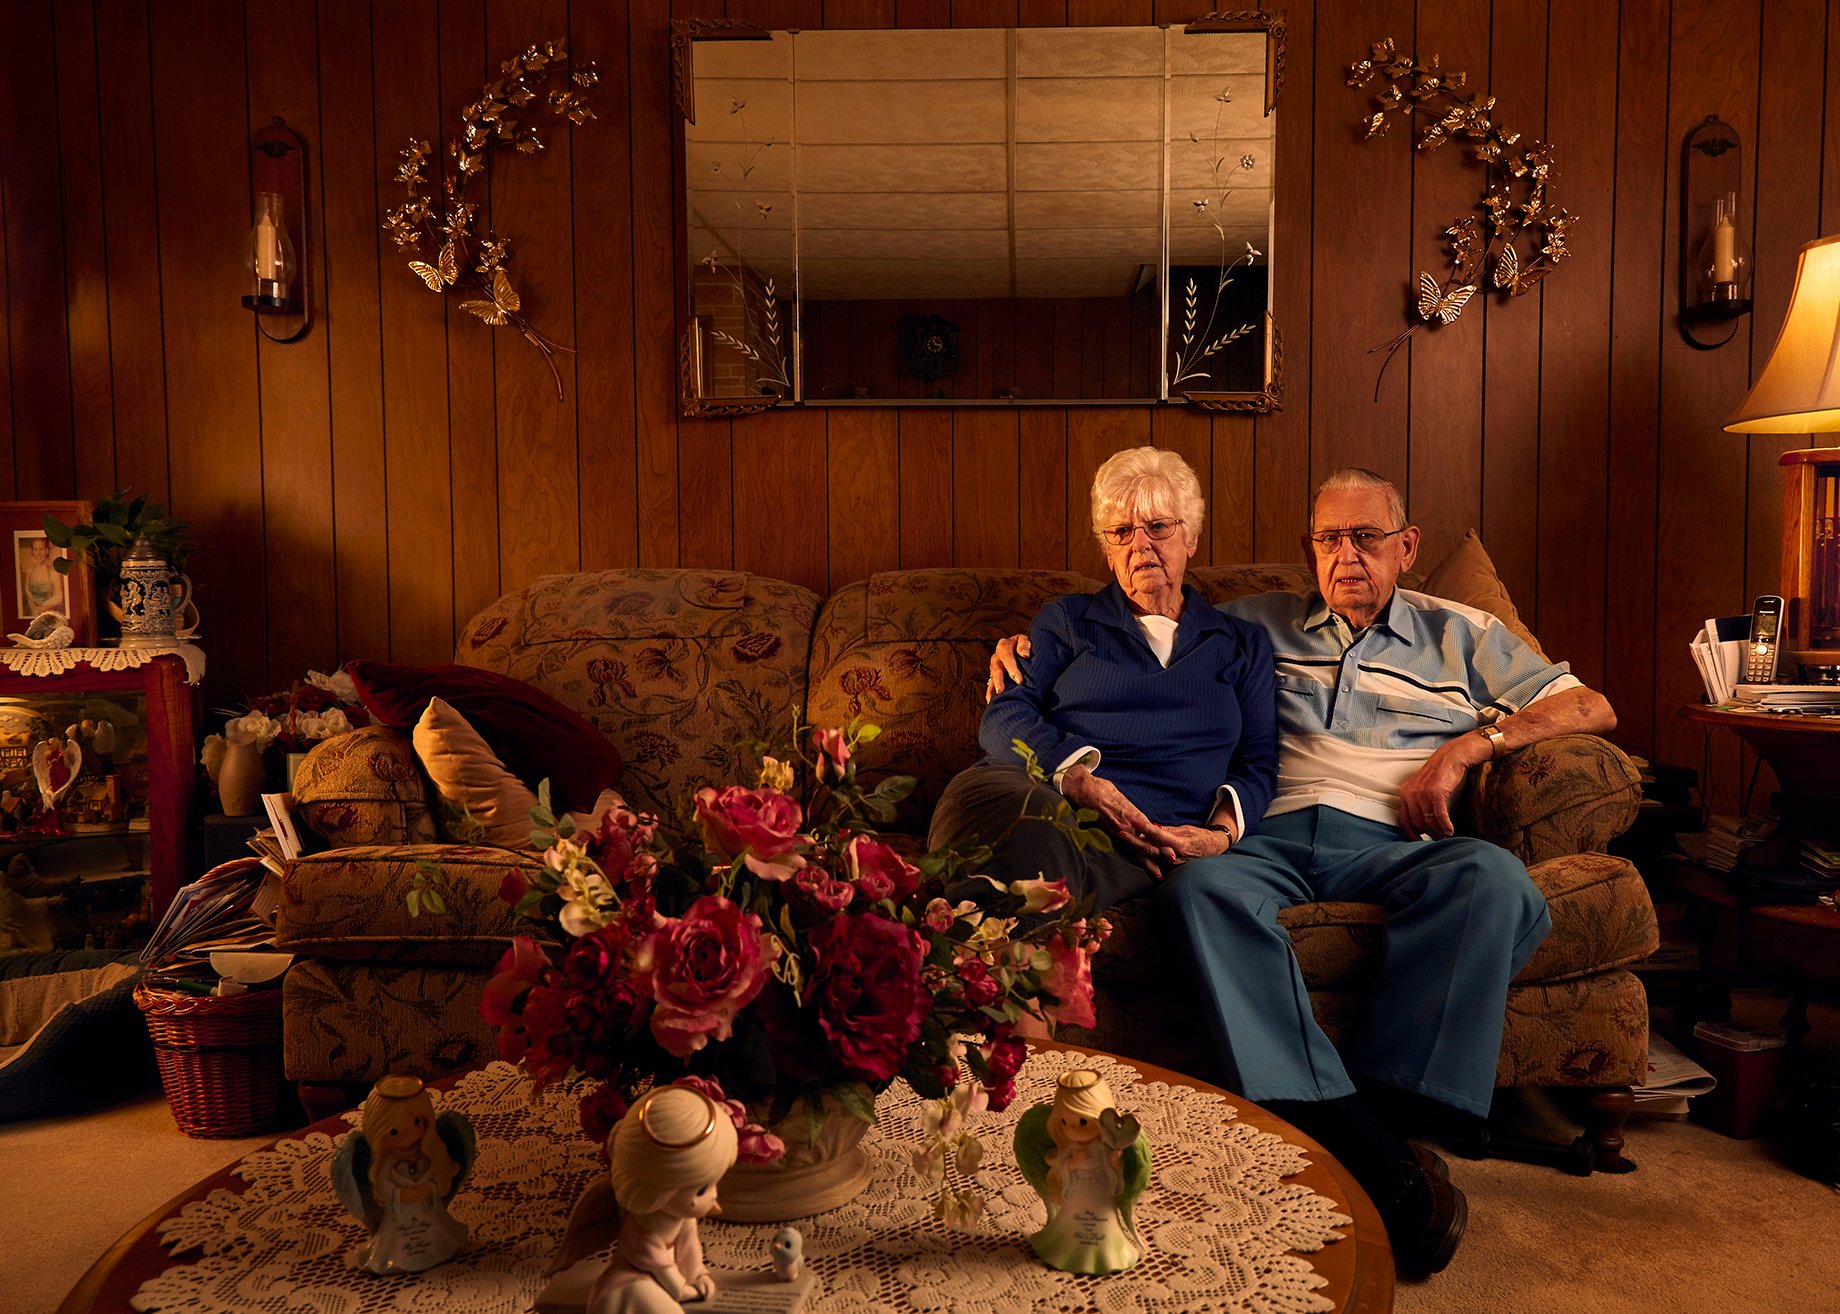 Photographer Sean Scheidt's grandparents sitting on the couch in their family home